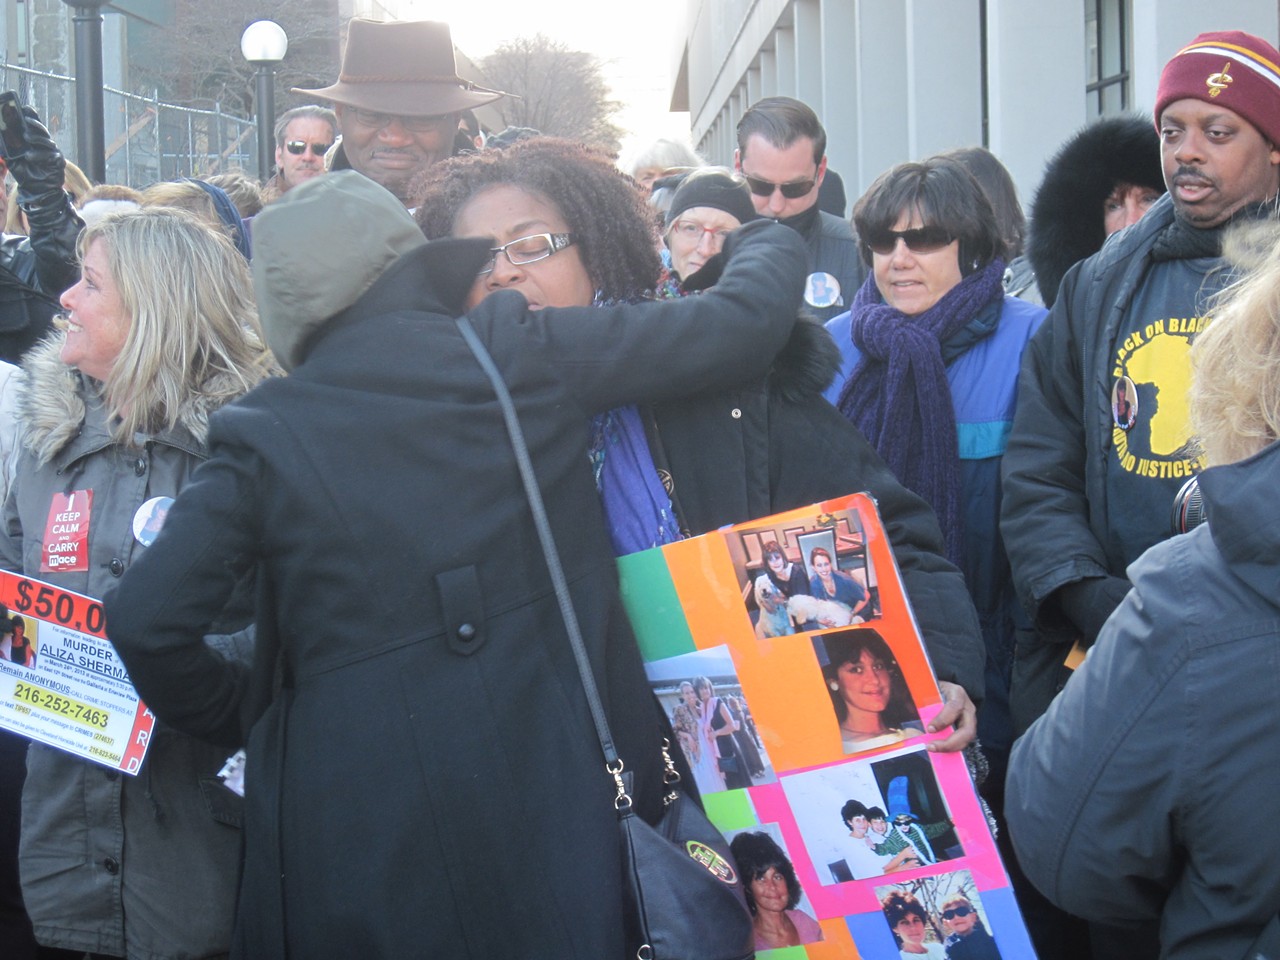 Friends embrace at the Justice for Aliza rally on March 24.